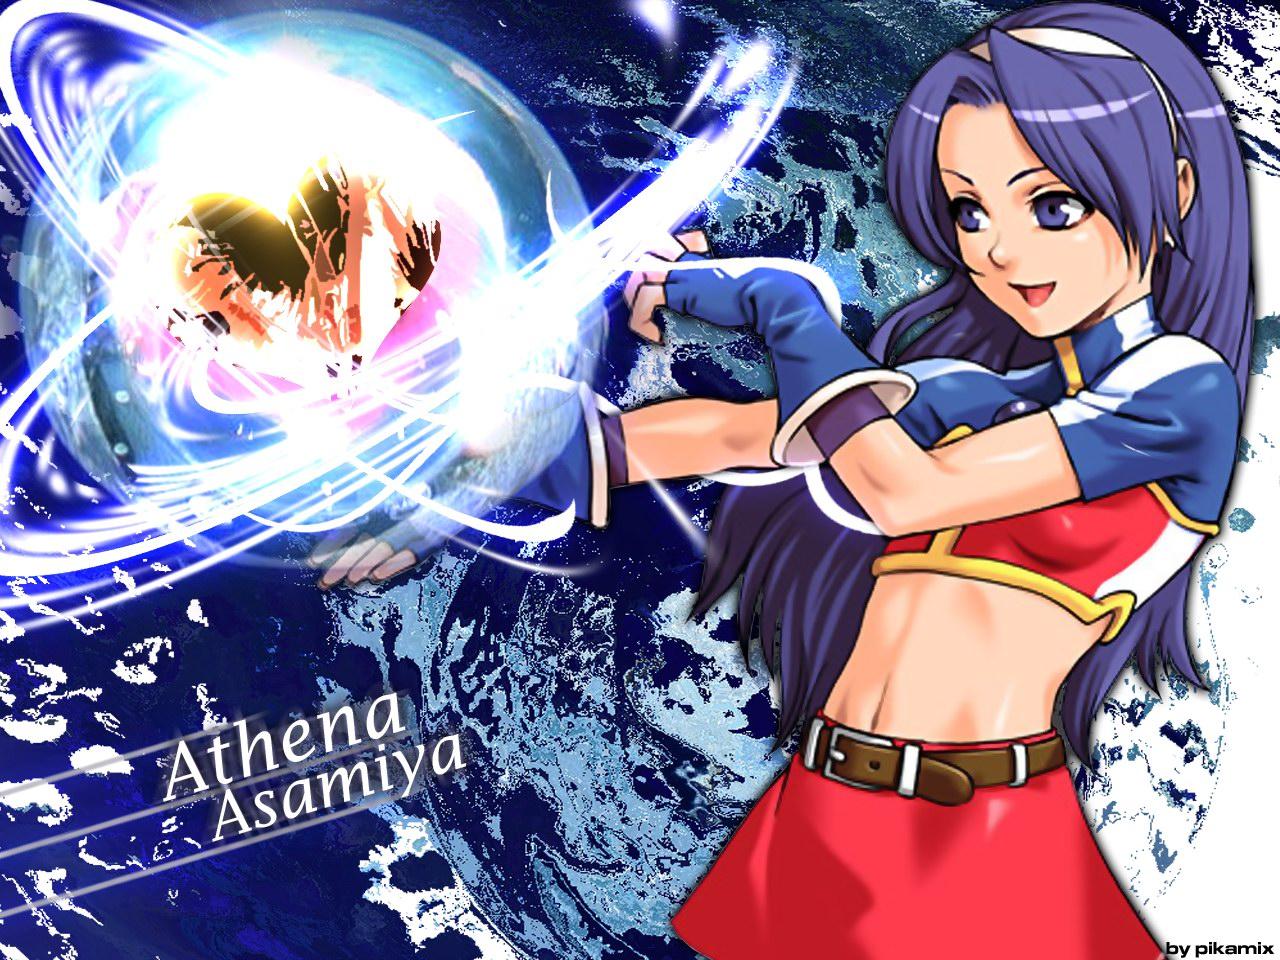 King of Fighters Wallpaper: Athena anime